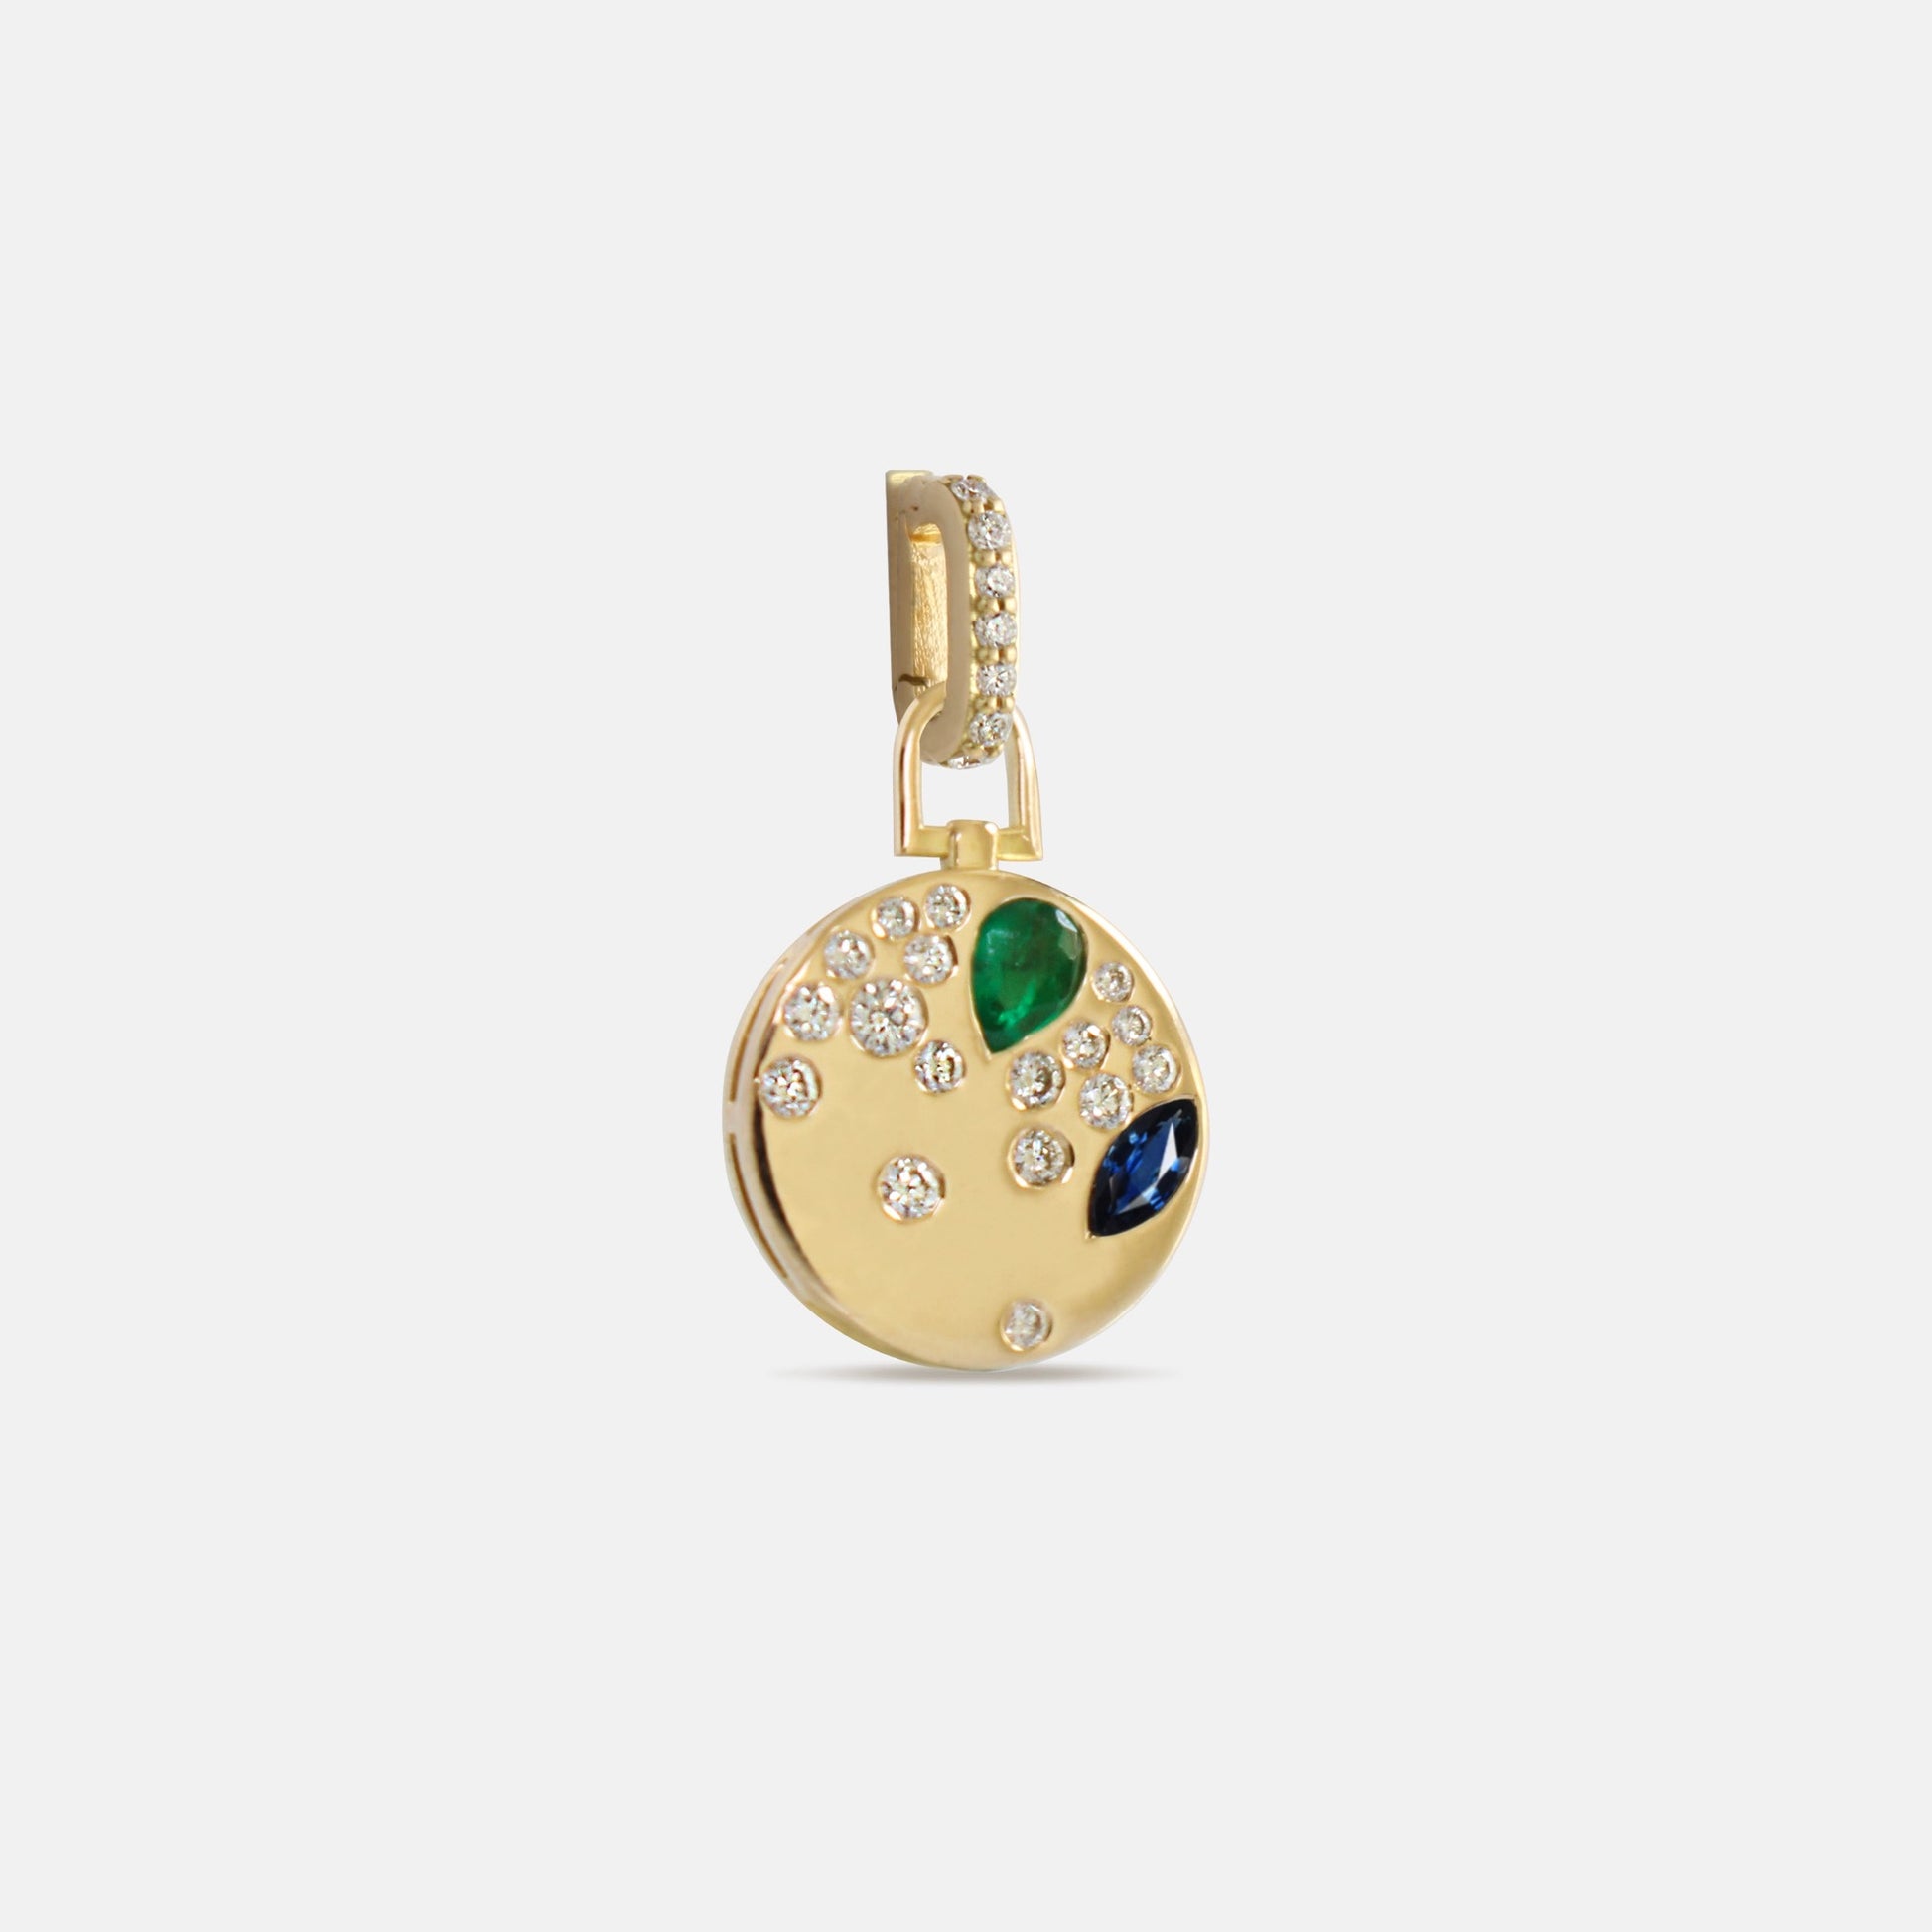 Mercury Charm in Gold, Diamonds, Sapphires and Emeralds